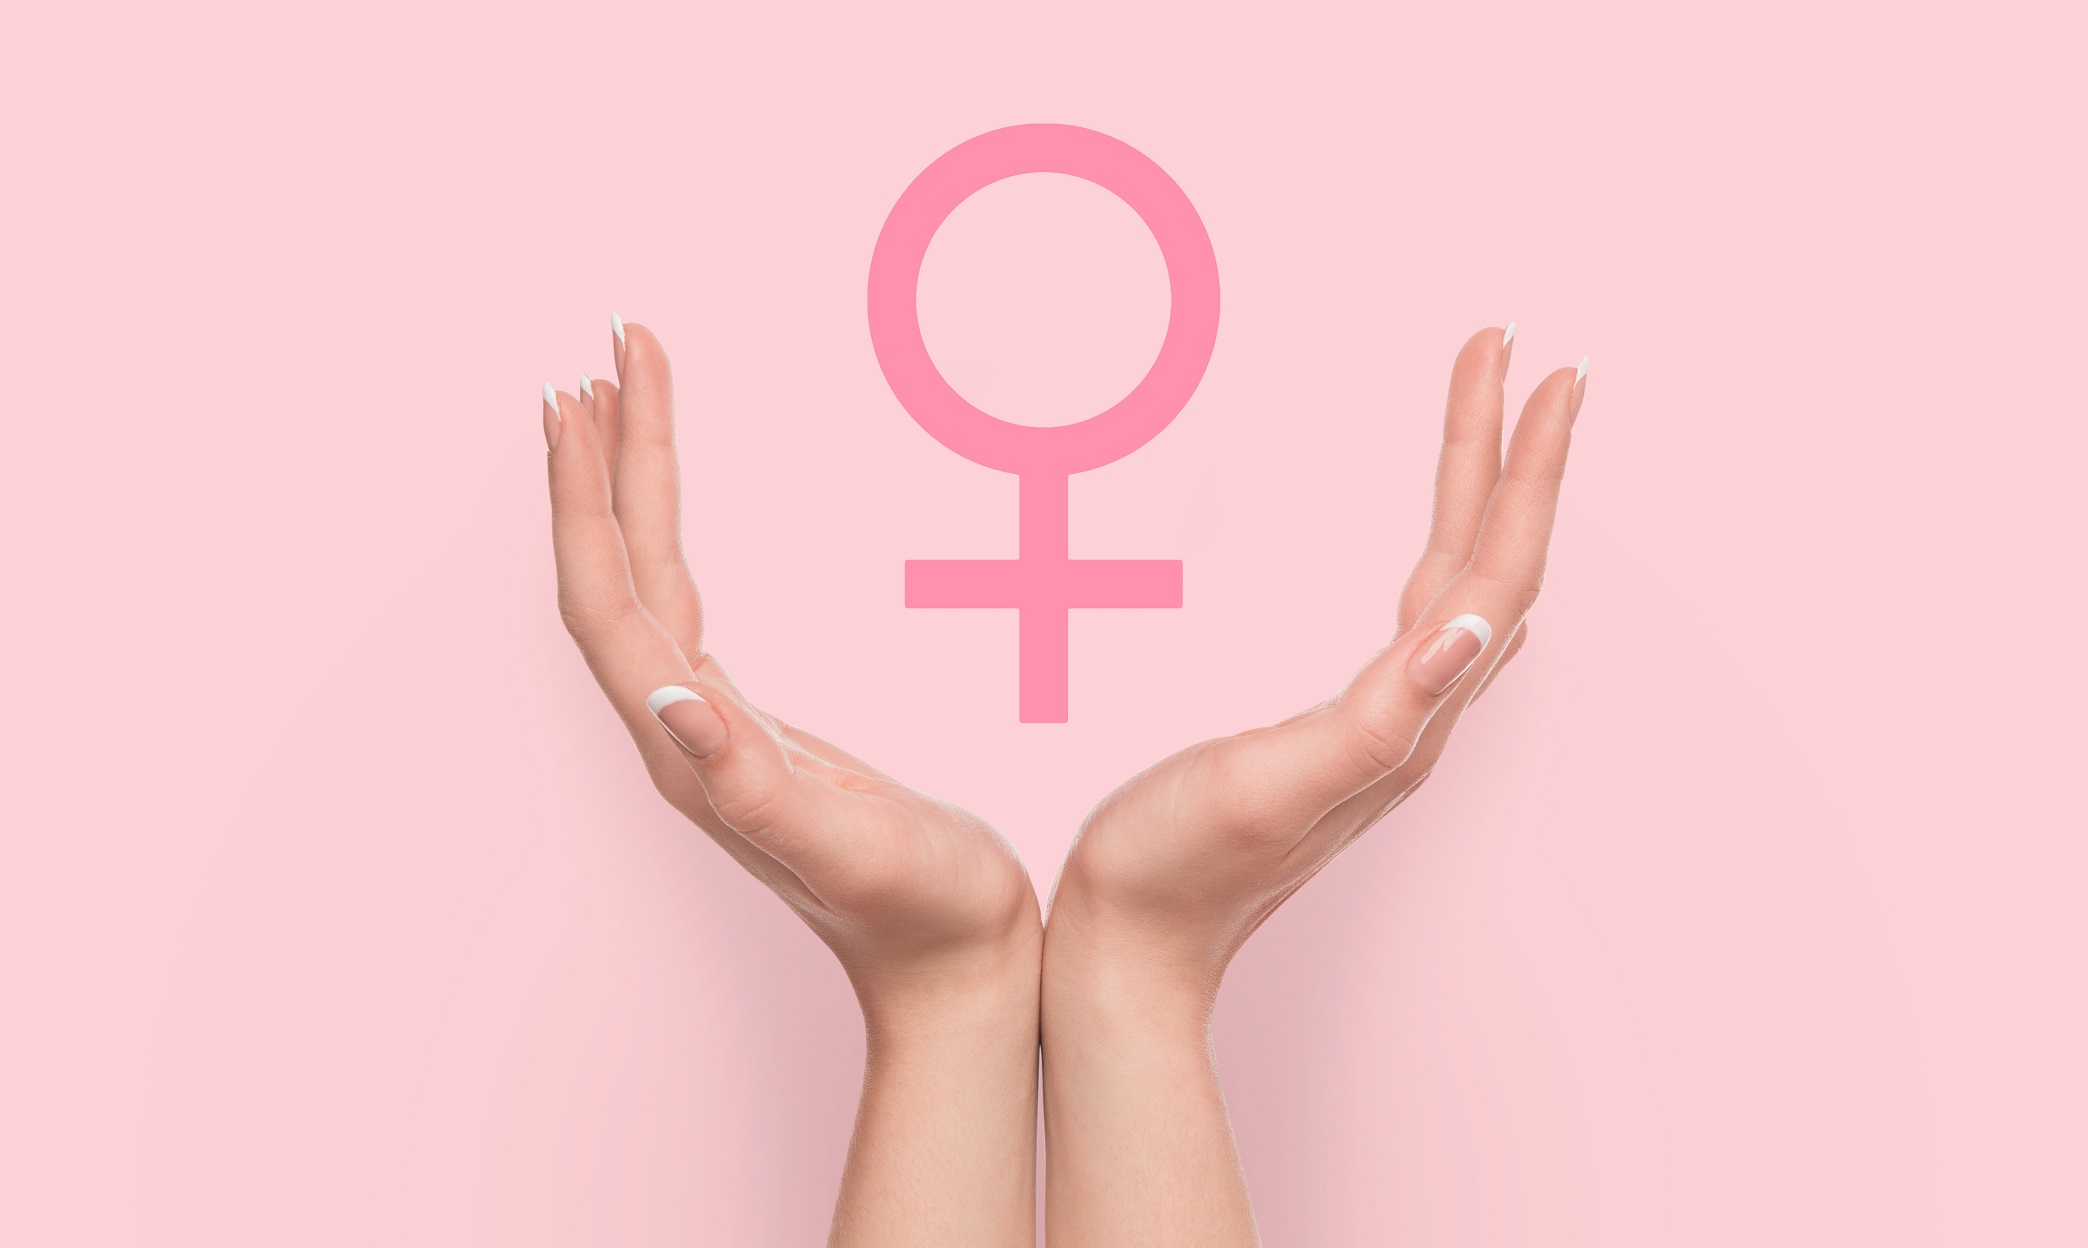 Women's power, feminism concept. Woman hands holding female gender sign on pink background.